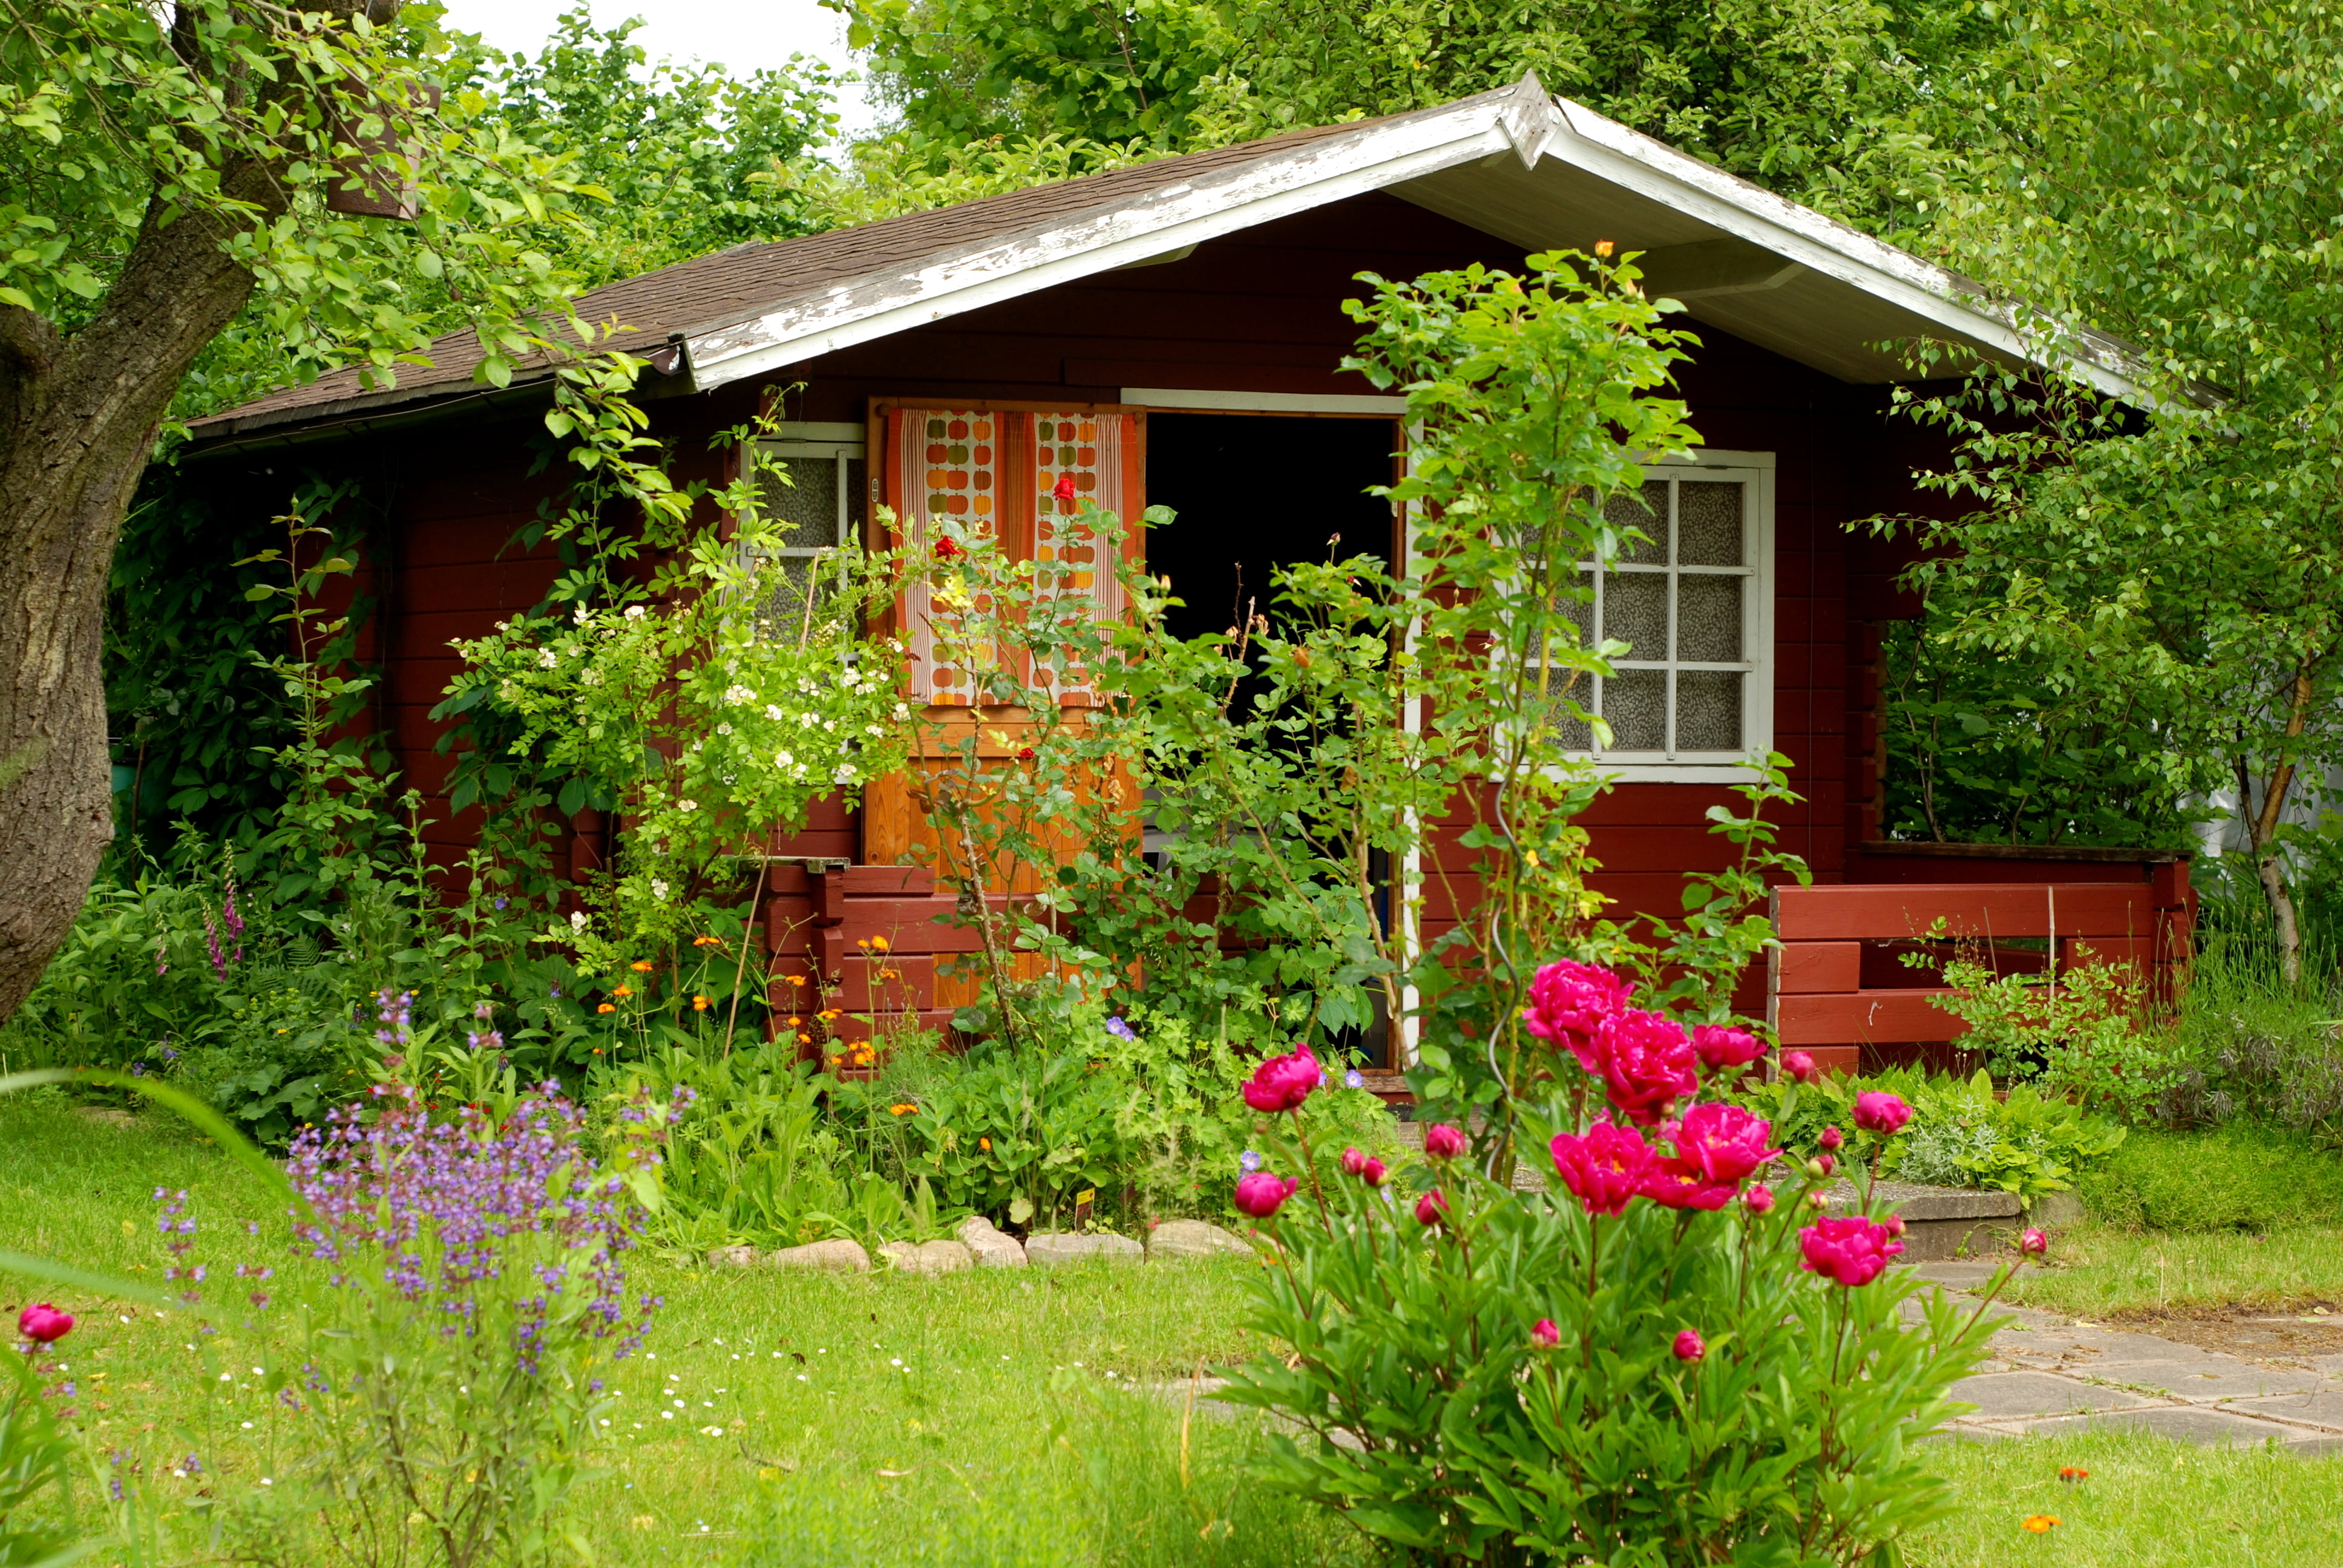 brown wooden house, summer, trees, flowers, garden, cottage, wood - Material